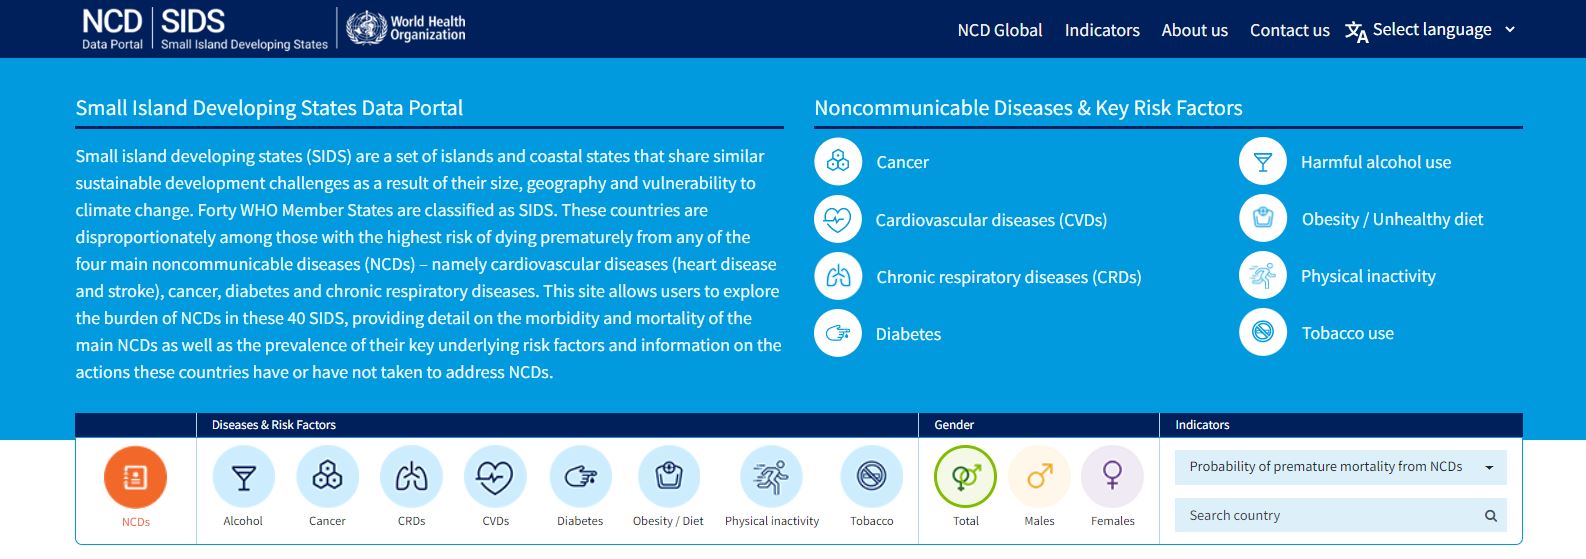 WHO releases data portal on NCDs in small island nations image